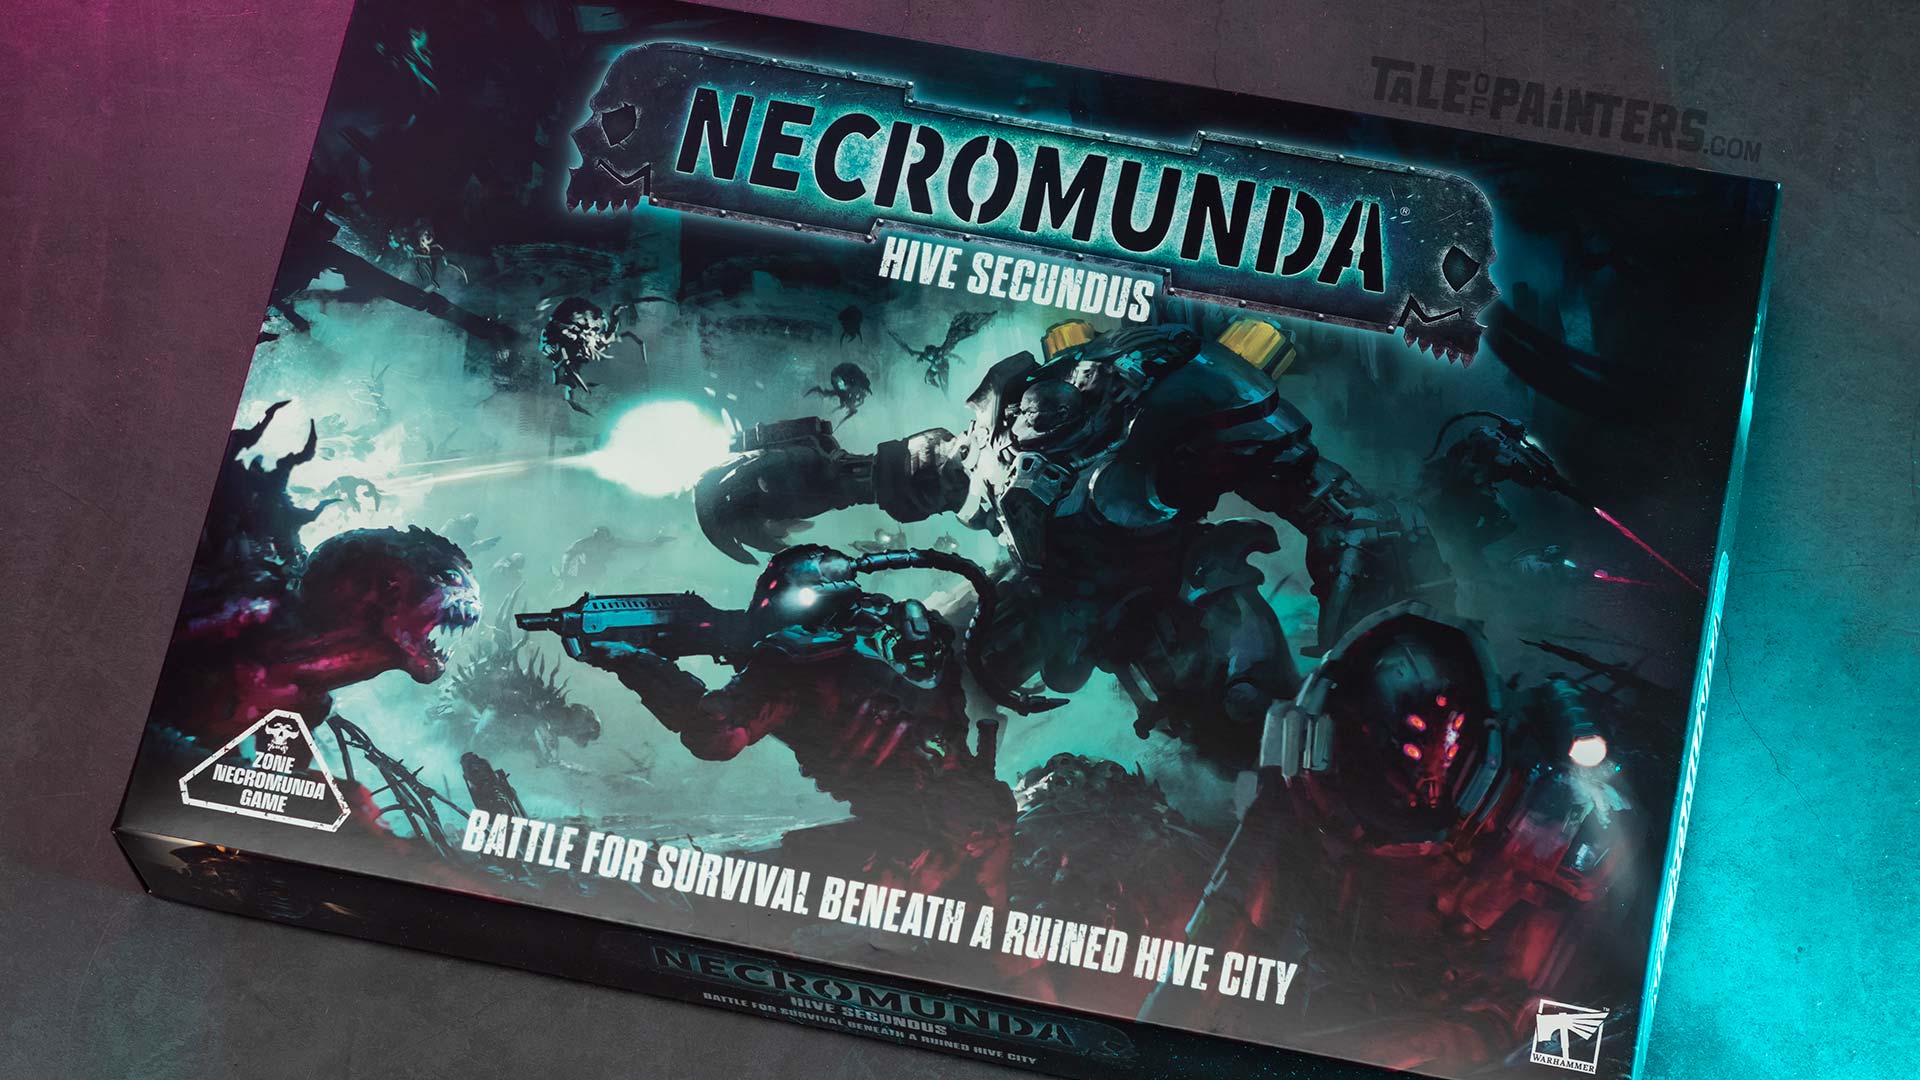 Necromunda Hive Secundus unboxing and review